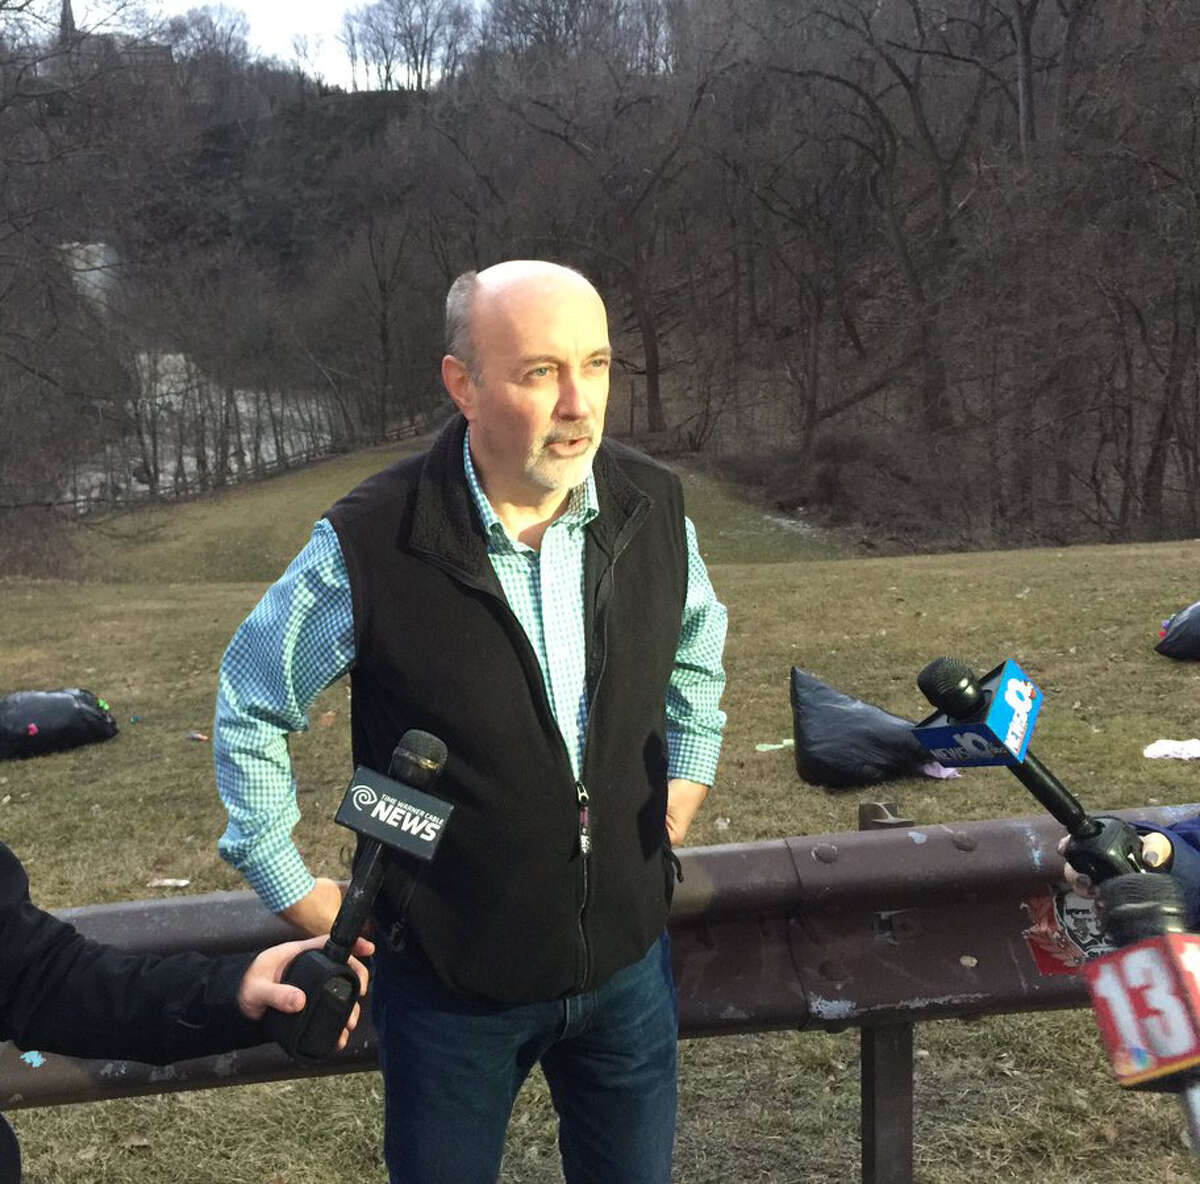 Troy Mayor Patrick Madden speaks to the press near the Poestenkill Gorge where witnesses reported a man fell into the water and did not resurface on Saturday, Feb. 25, 2017.